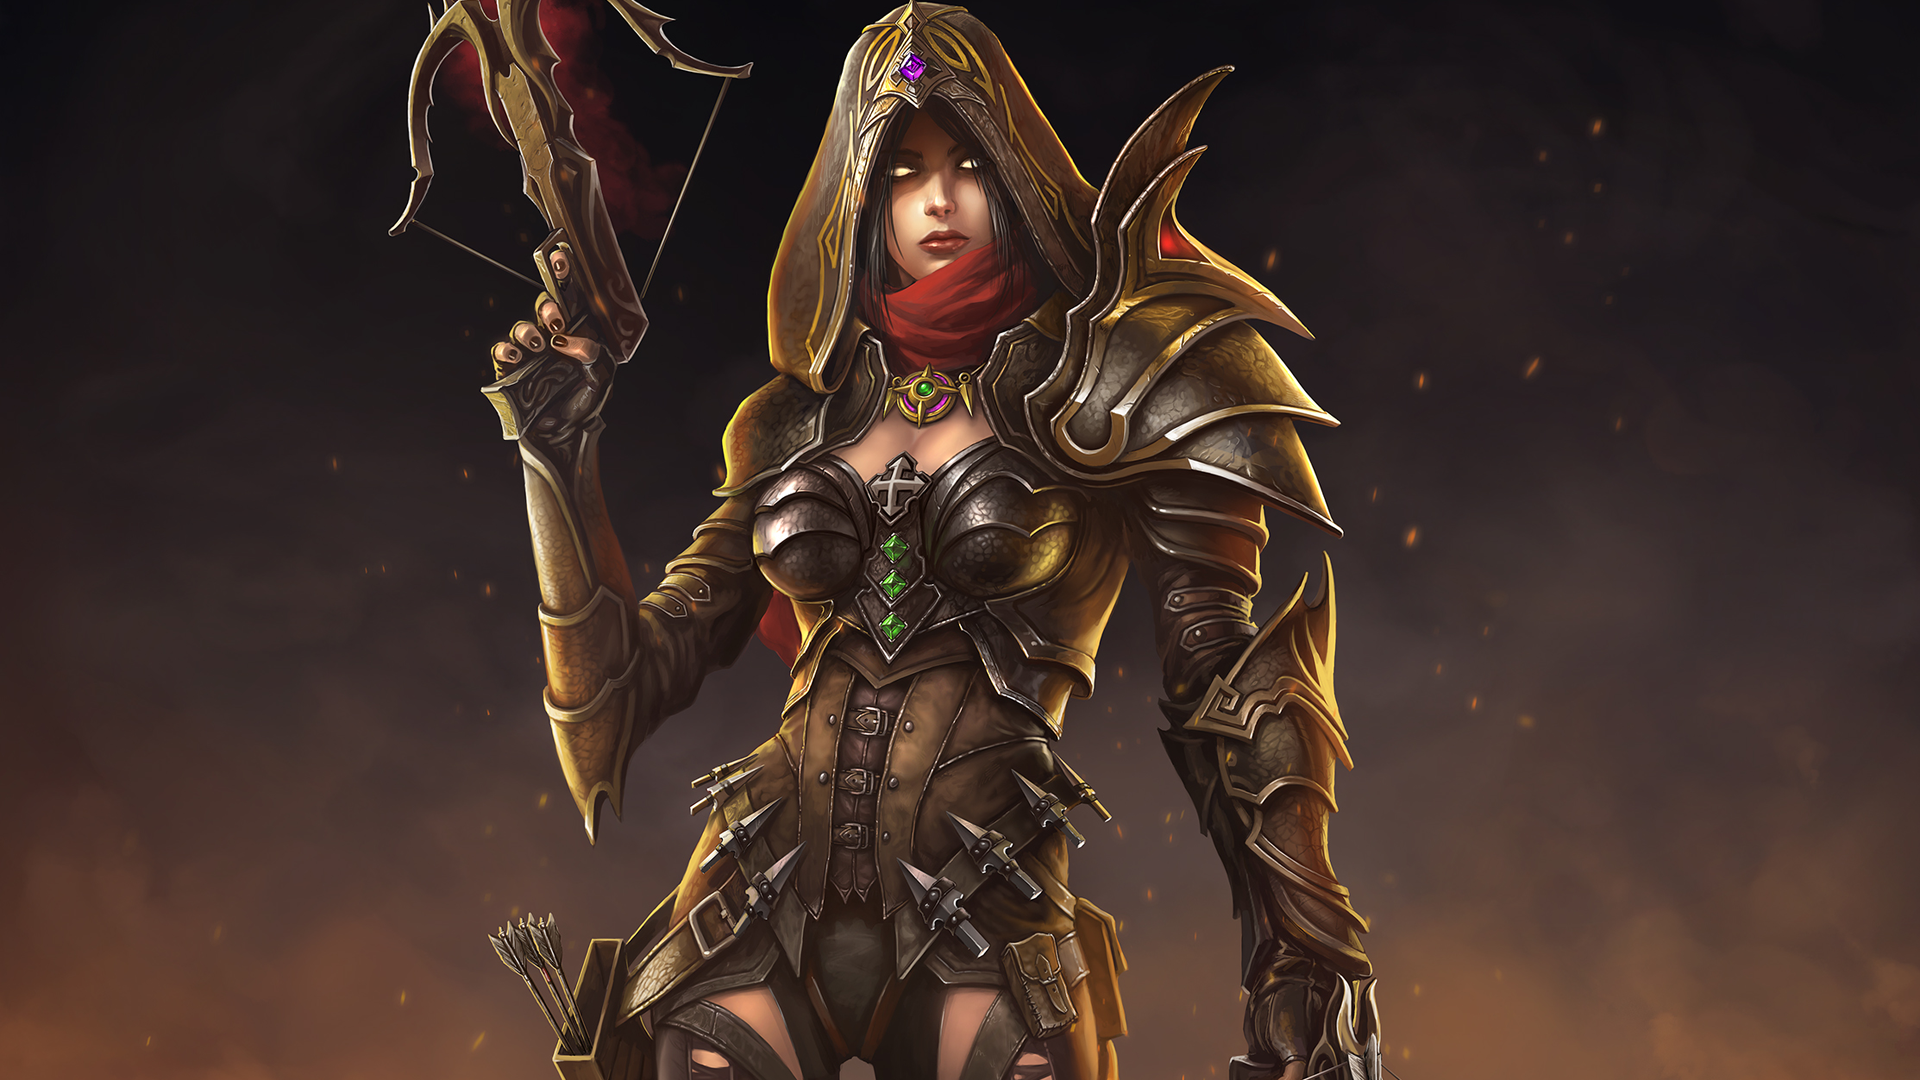 Download 1920x1080 Diablo Crossbow, Armor, Hoodie, Red Scarf, Necklace Wallpaper for Widescreen